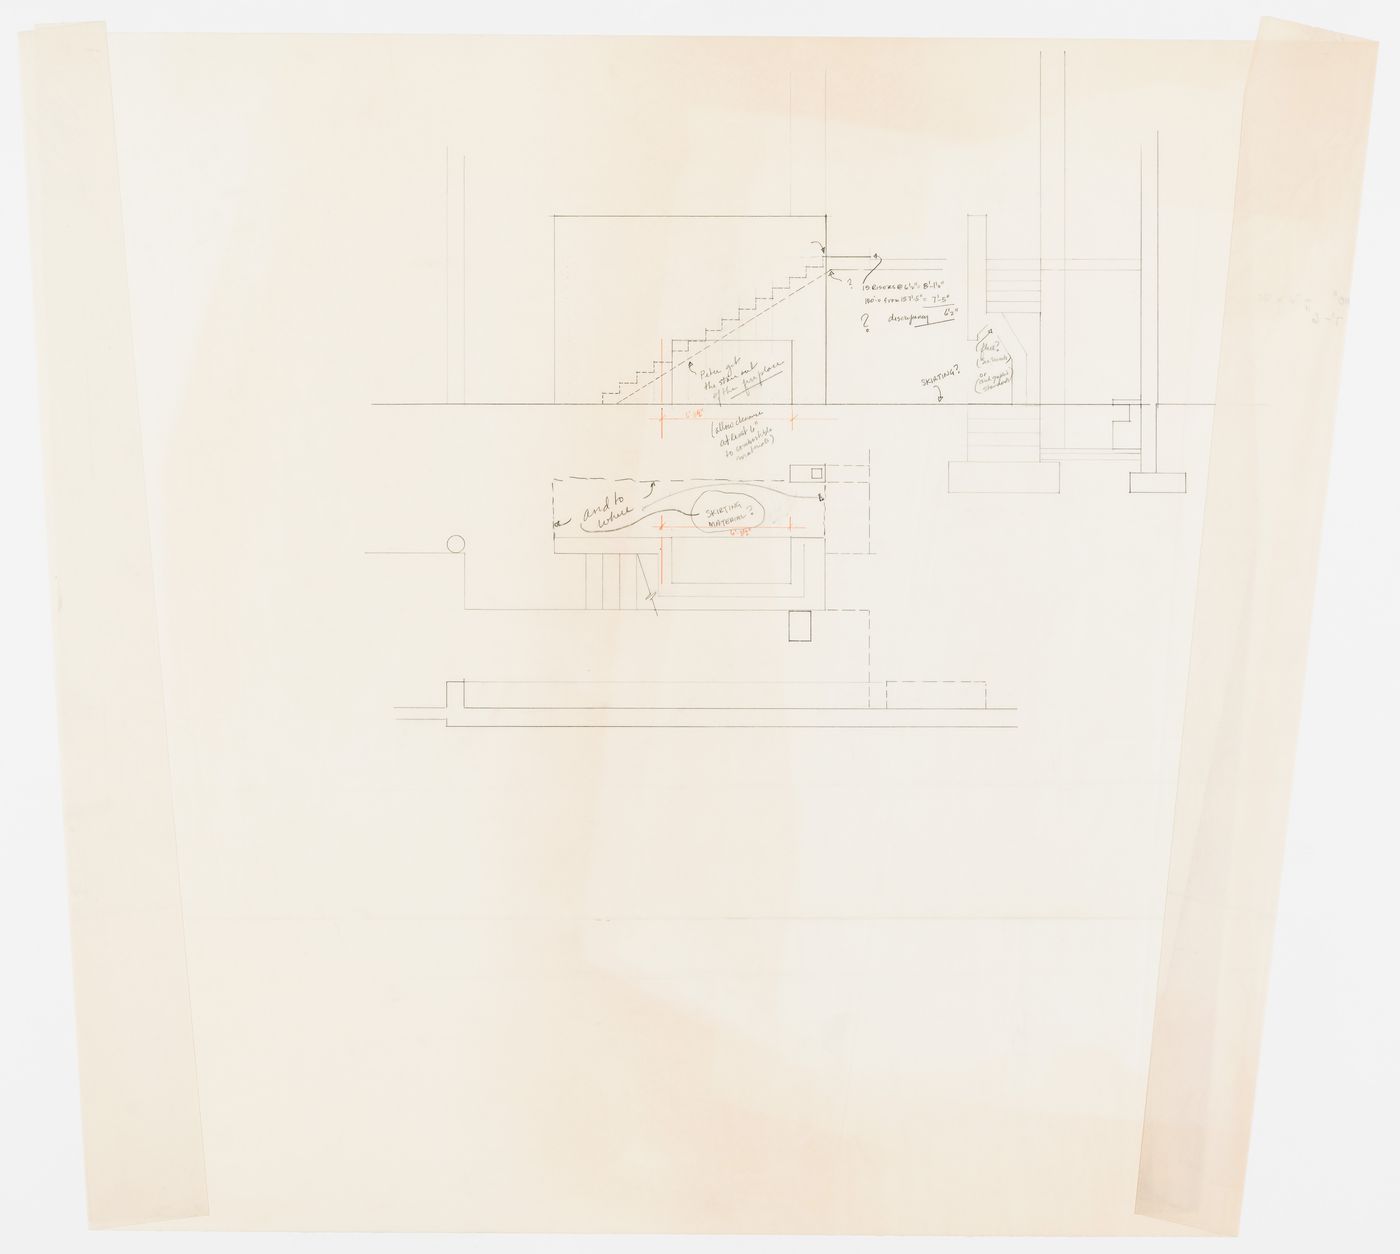 Sketches and notes for House I (Barenholtz Pavilion), Princeton, New Jersey